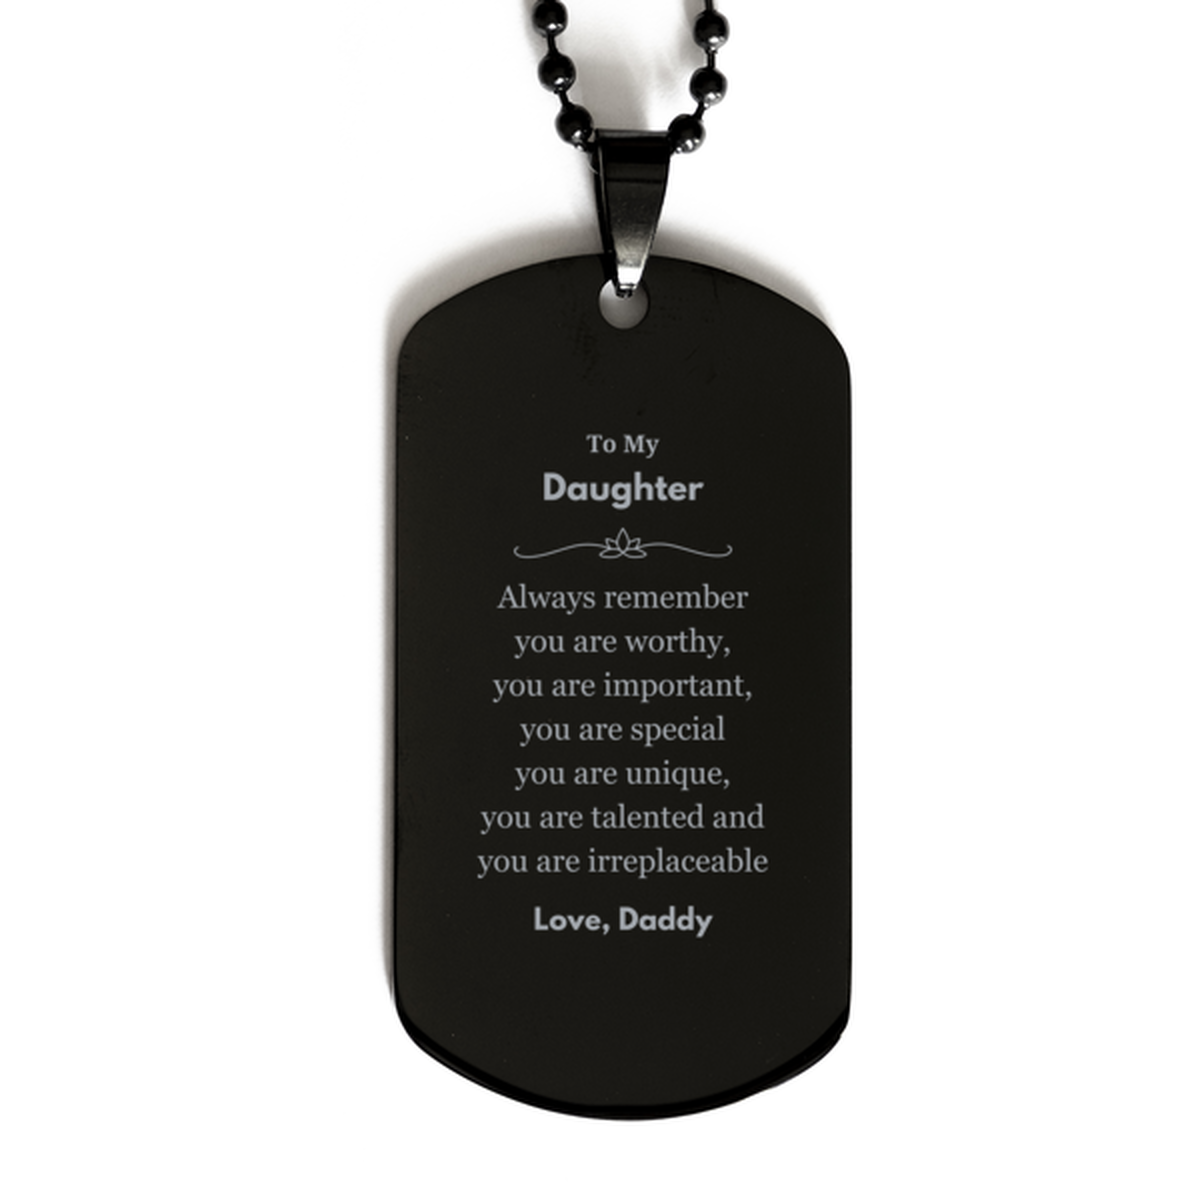 Daughter Birthday Gifts from Daddy, Inspirational Black Dog Tag for Daughter Christmas Graduation Gifts for Daughter Always remember you are worthy, you are important. Love, Daddy